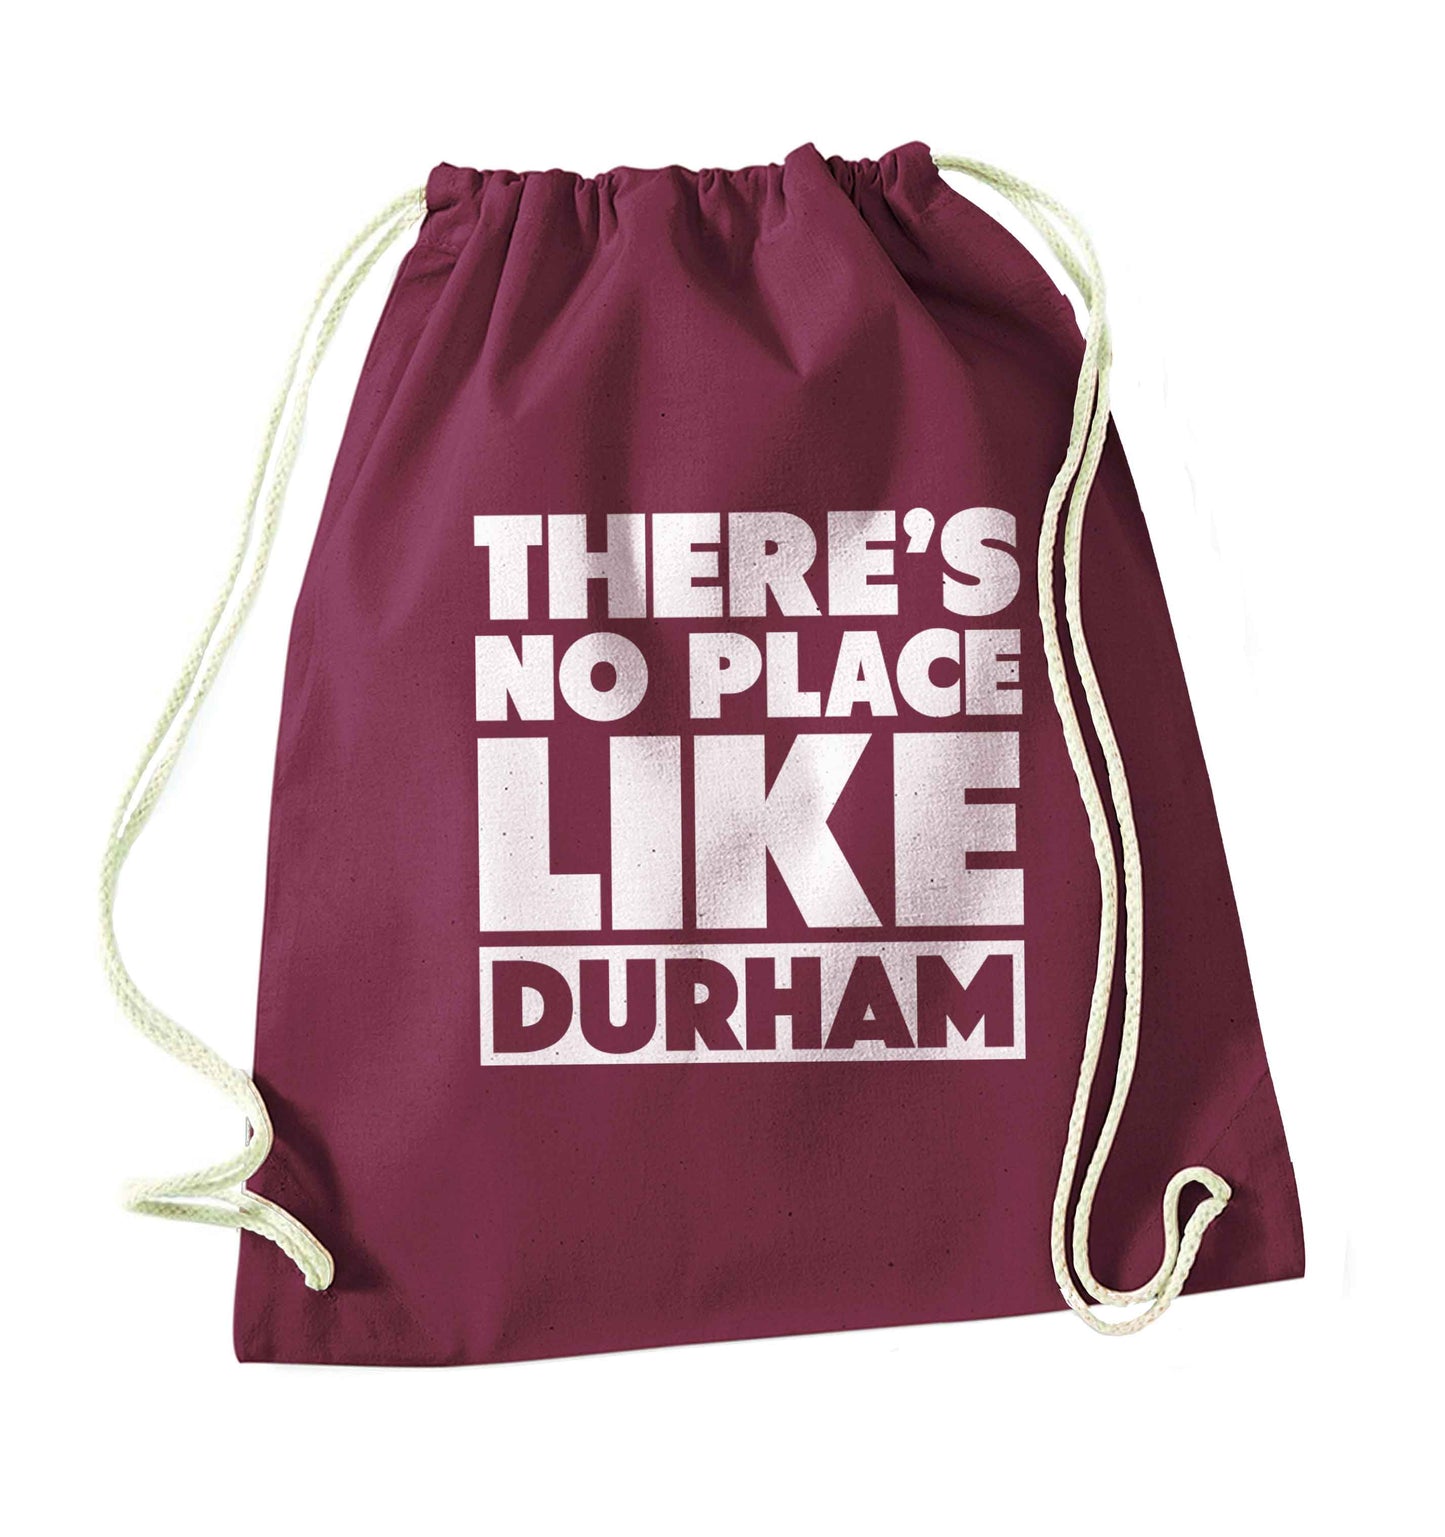 There's no place like Durham maroon drawstring bag